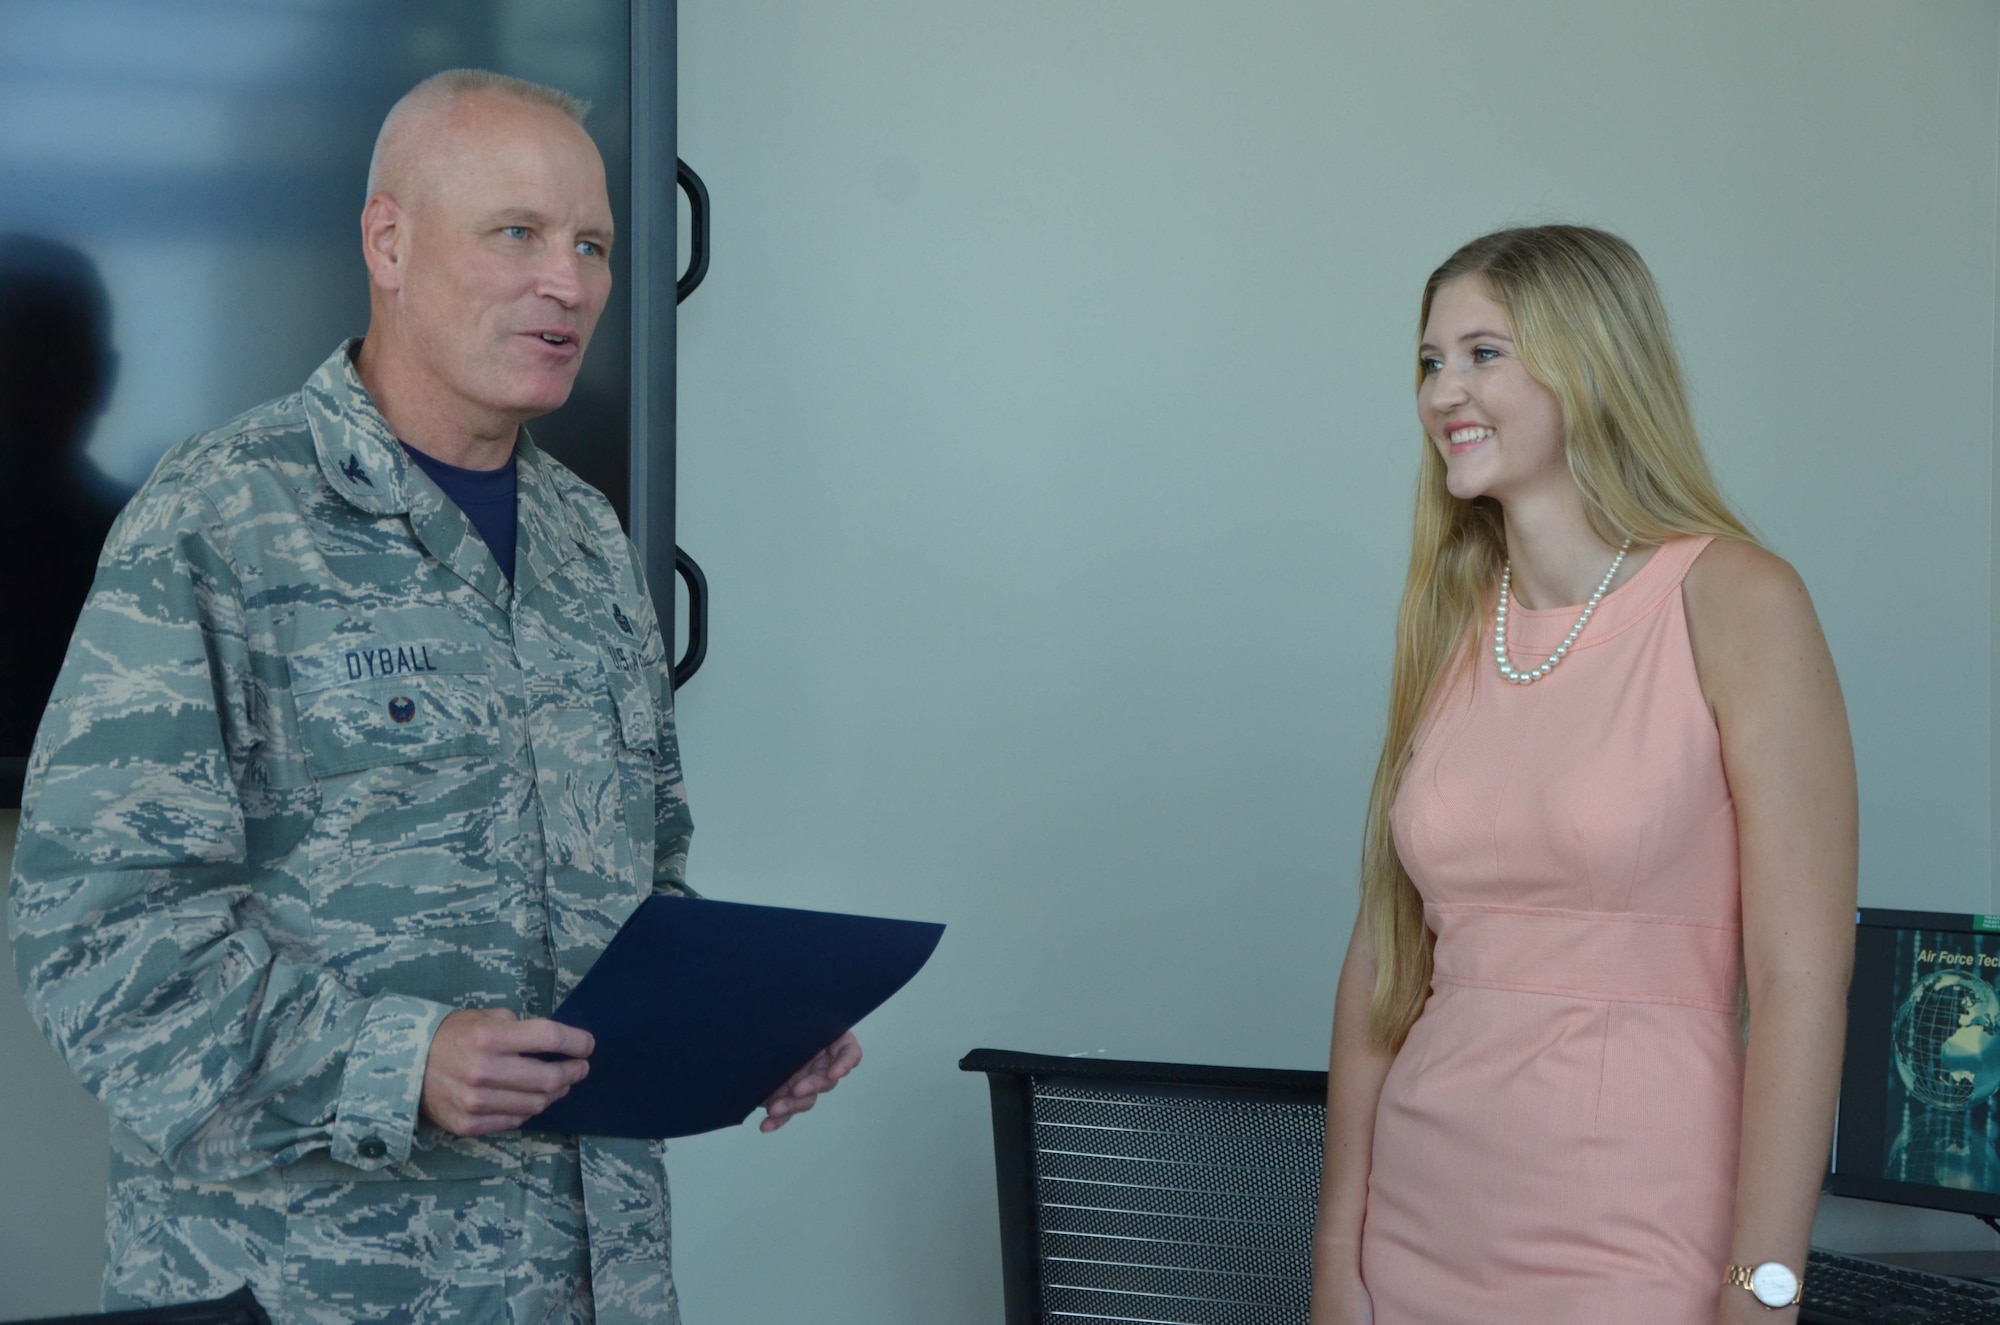 Col. Jeffrey W. Dyball, vice commander of the Air Force Technical Applications Center, Patrick AFB, Fla., presents a certification of recognition to Madison Zook, recipient of AFTAC Company Grade Officer Council’s annual scholarship.  Zook, a recent Edgewood Jr./Sr. High School graduate, received the $500 award July 29, 2016 for her essay on business analytics.  (U.S. Air Force photo by Susan A. Romano)